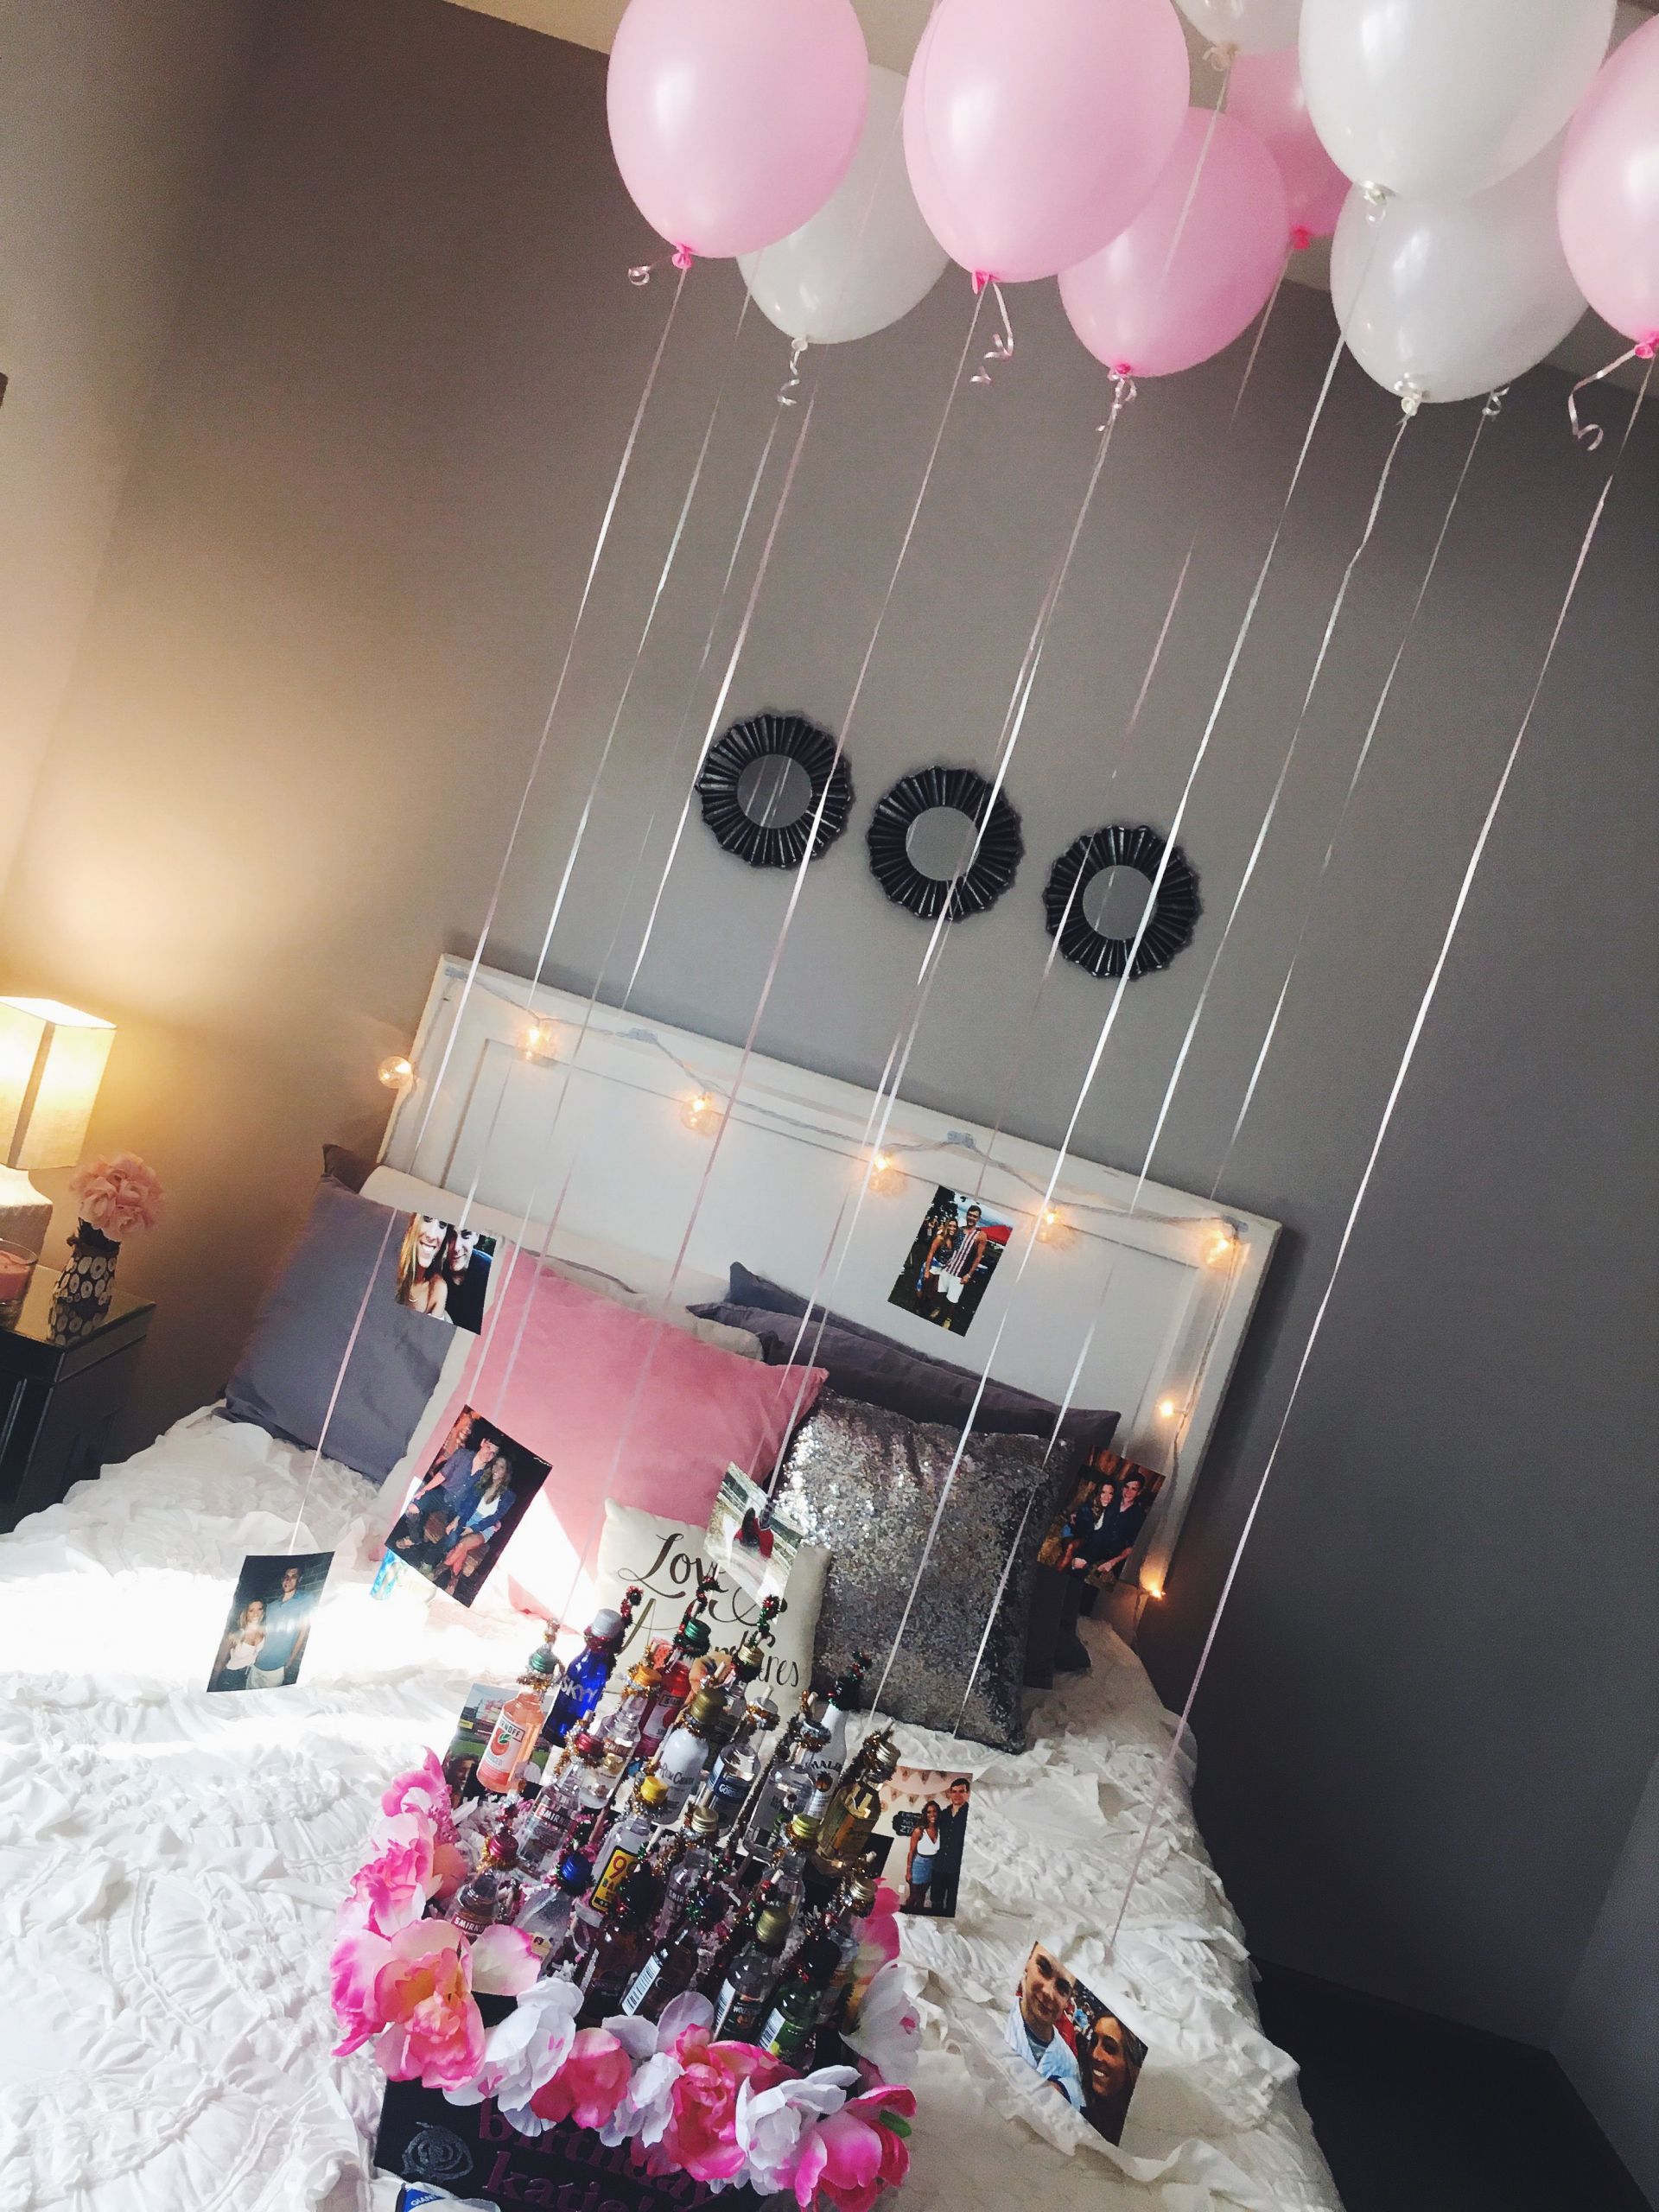 Birthday Gift Ideas For A Girlfriend
 easy and cute decorations for a friend or girlfriends 21st